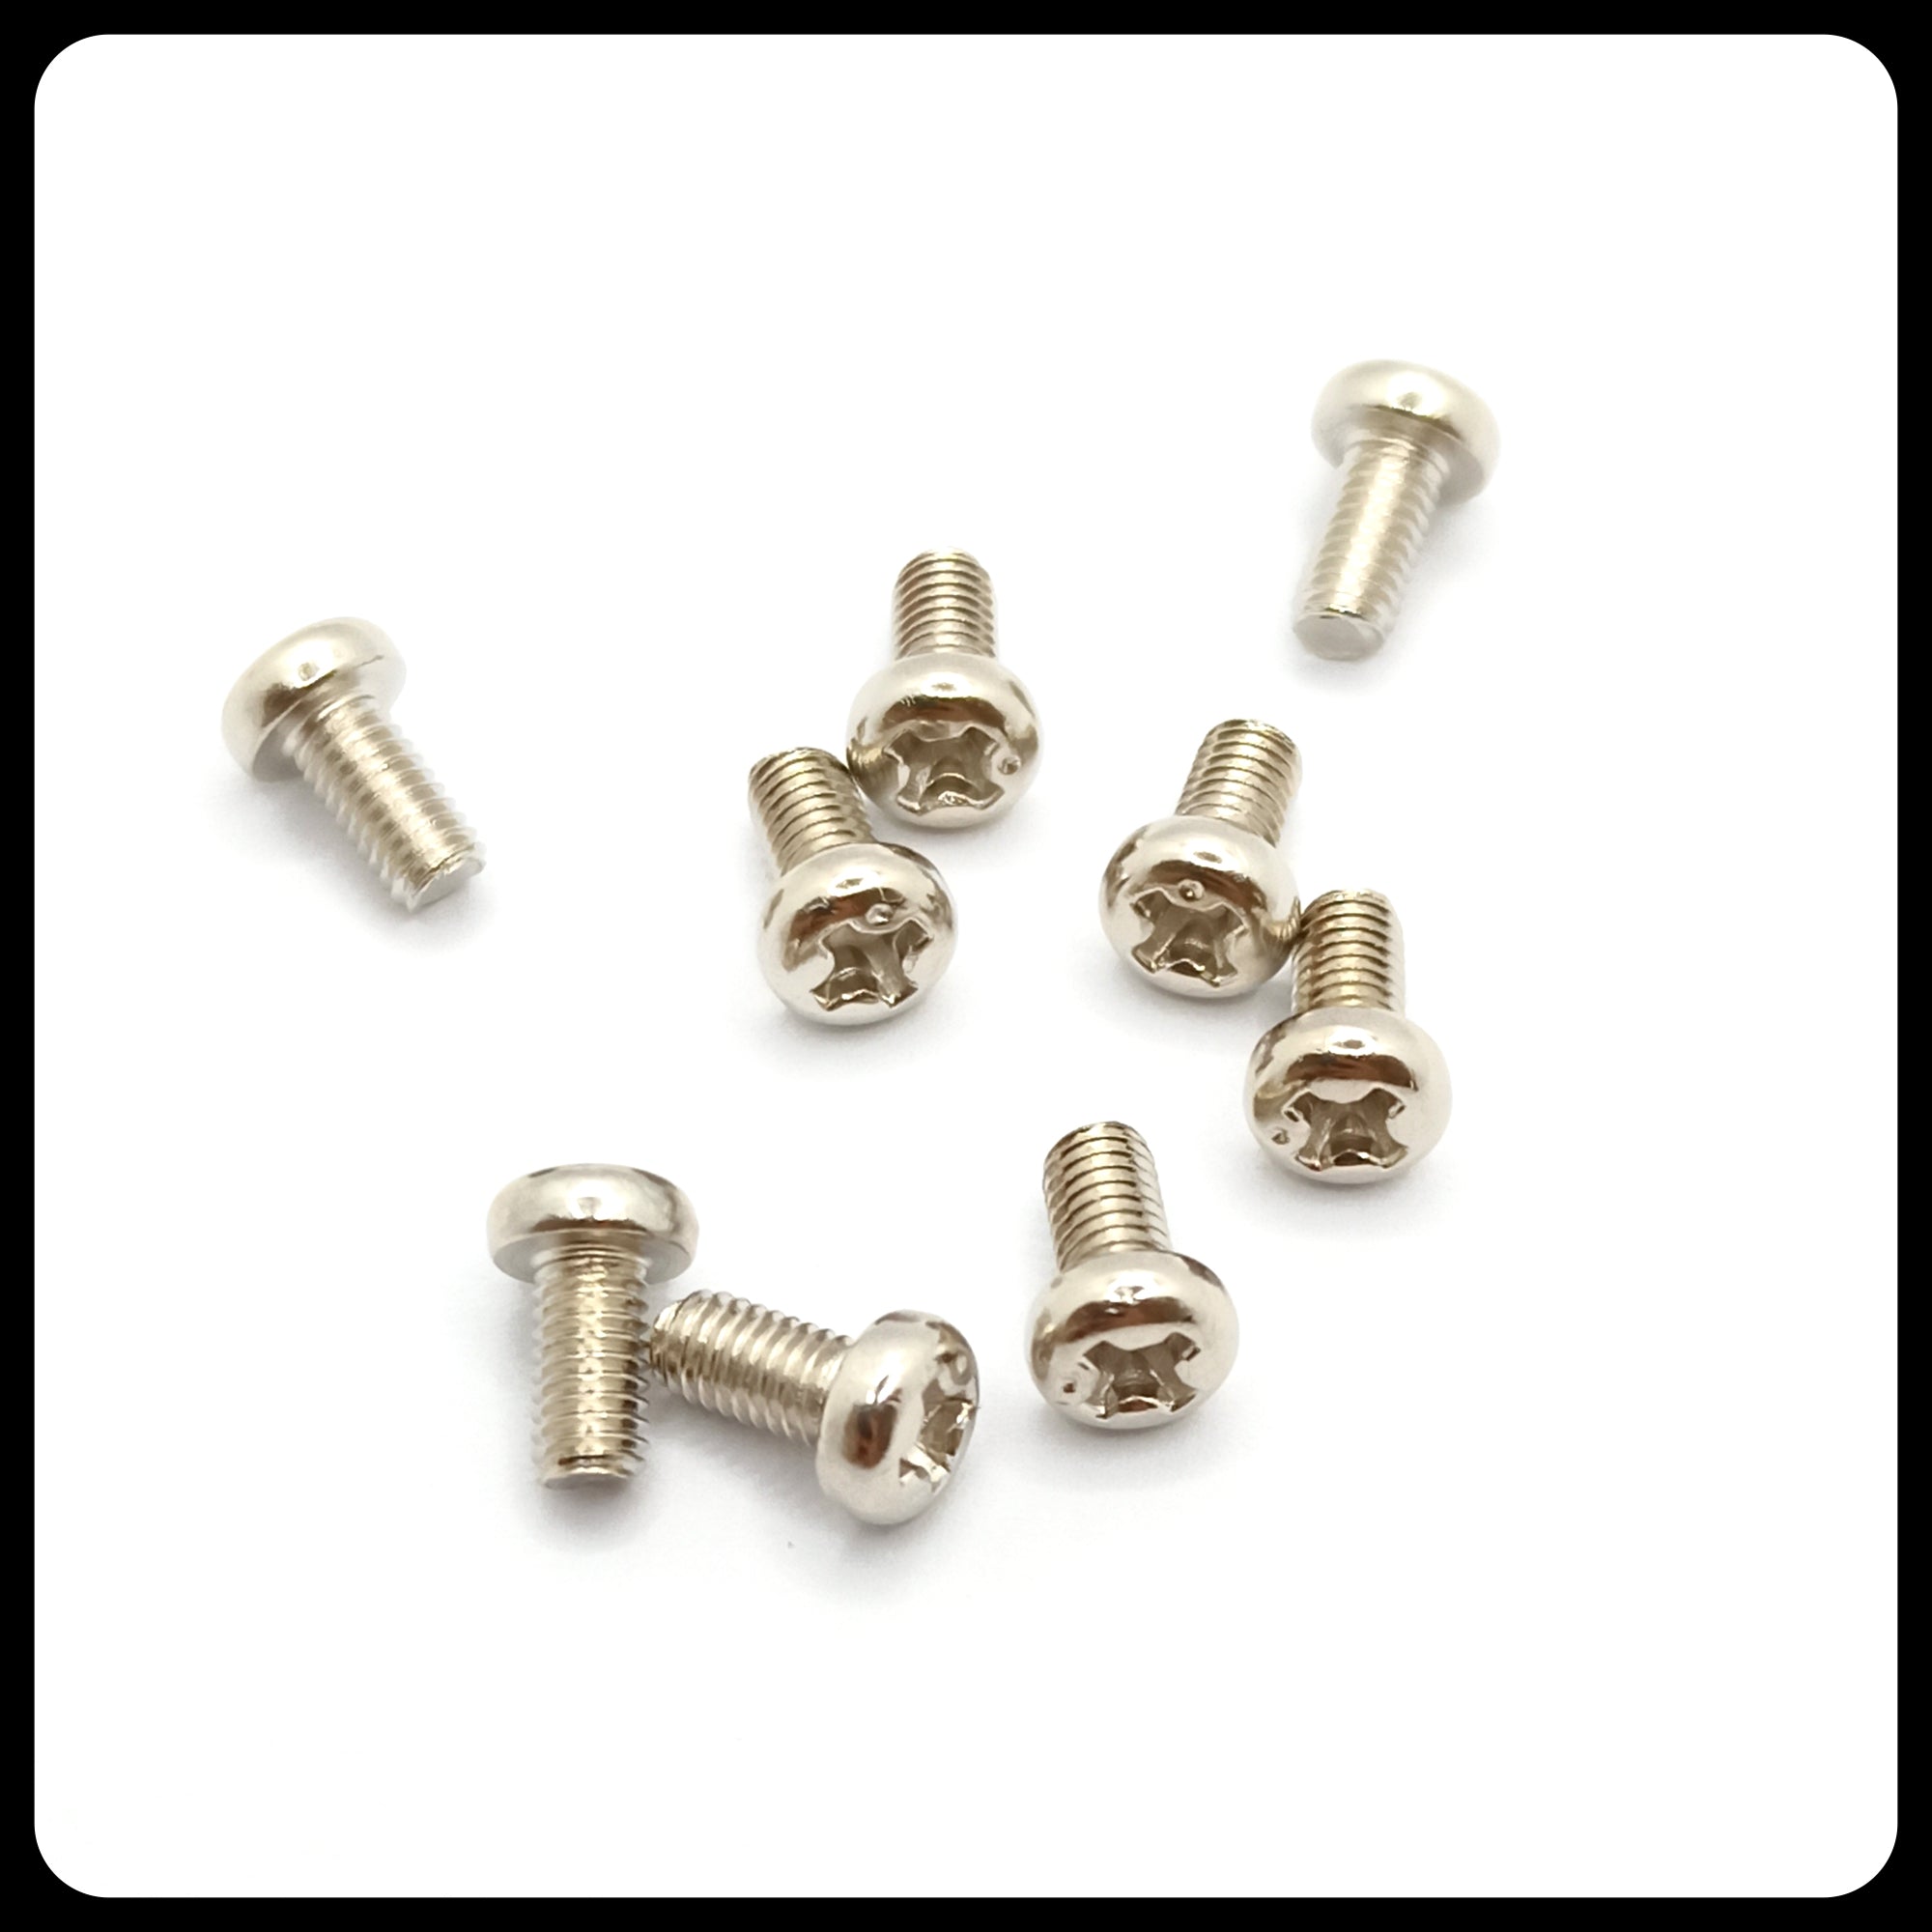 Switch Mounting Screws for Guitar Pickup Selector Switch